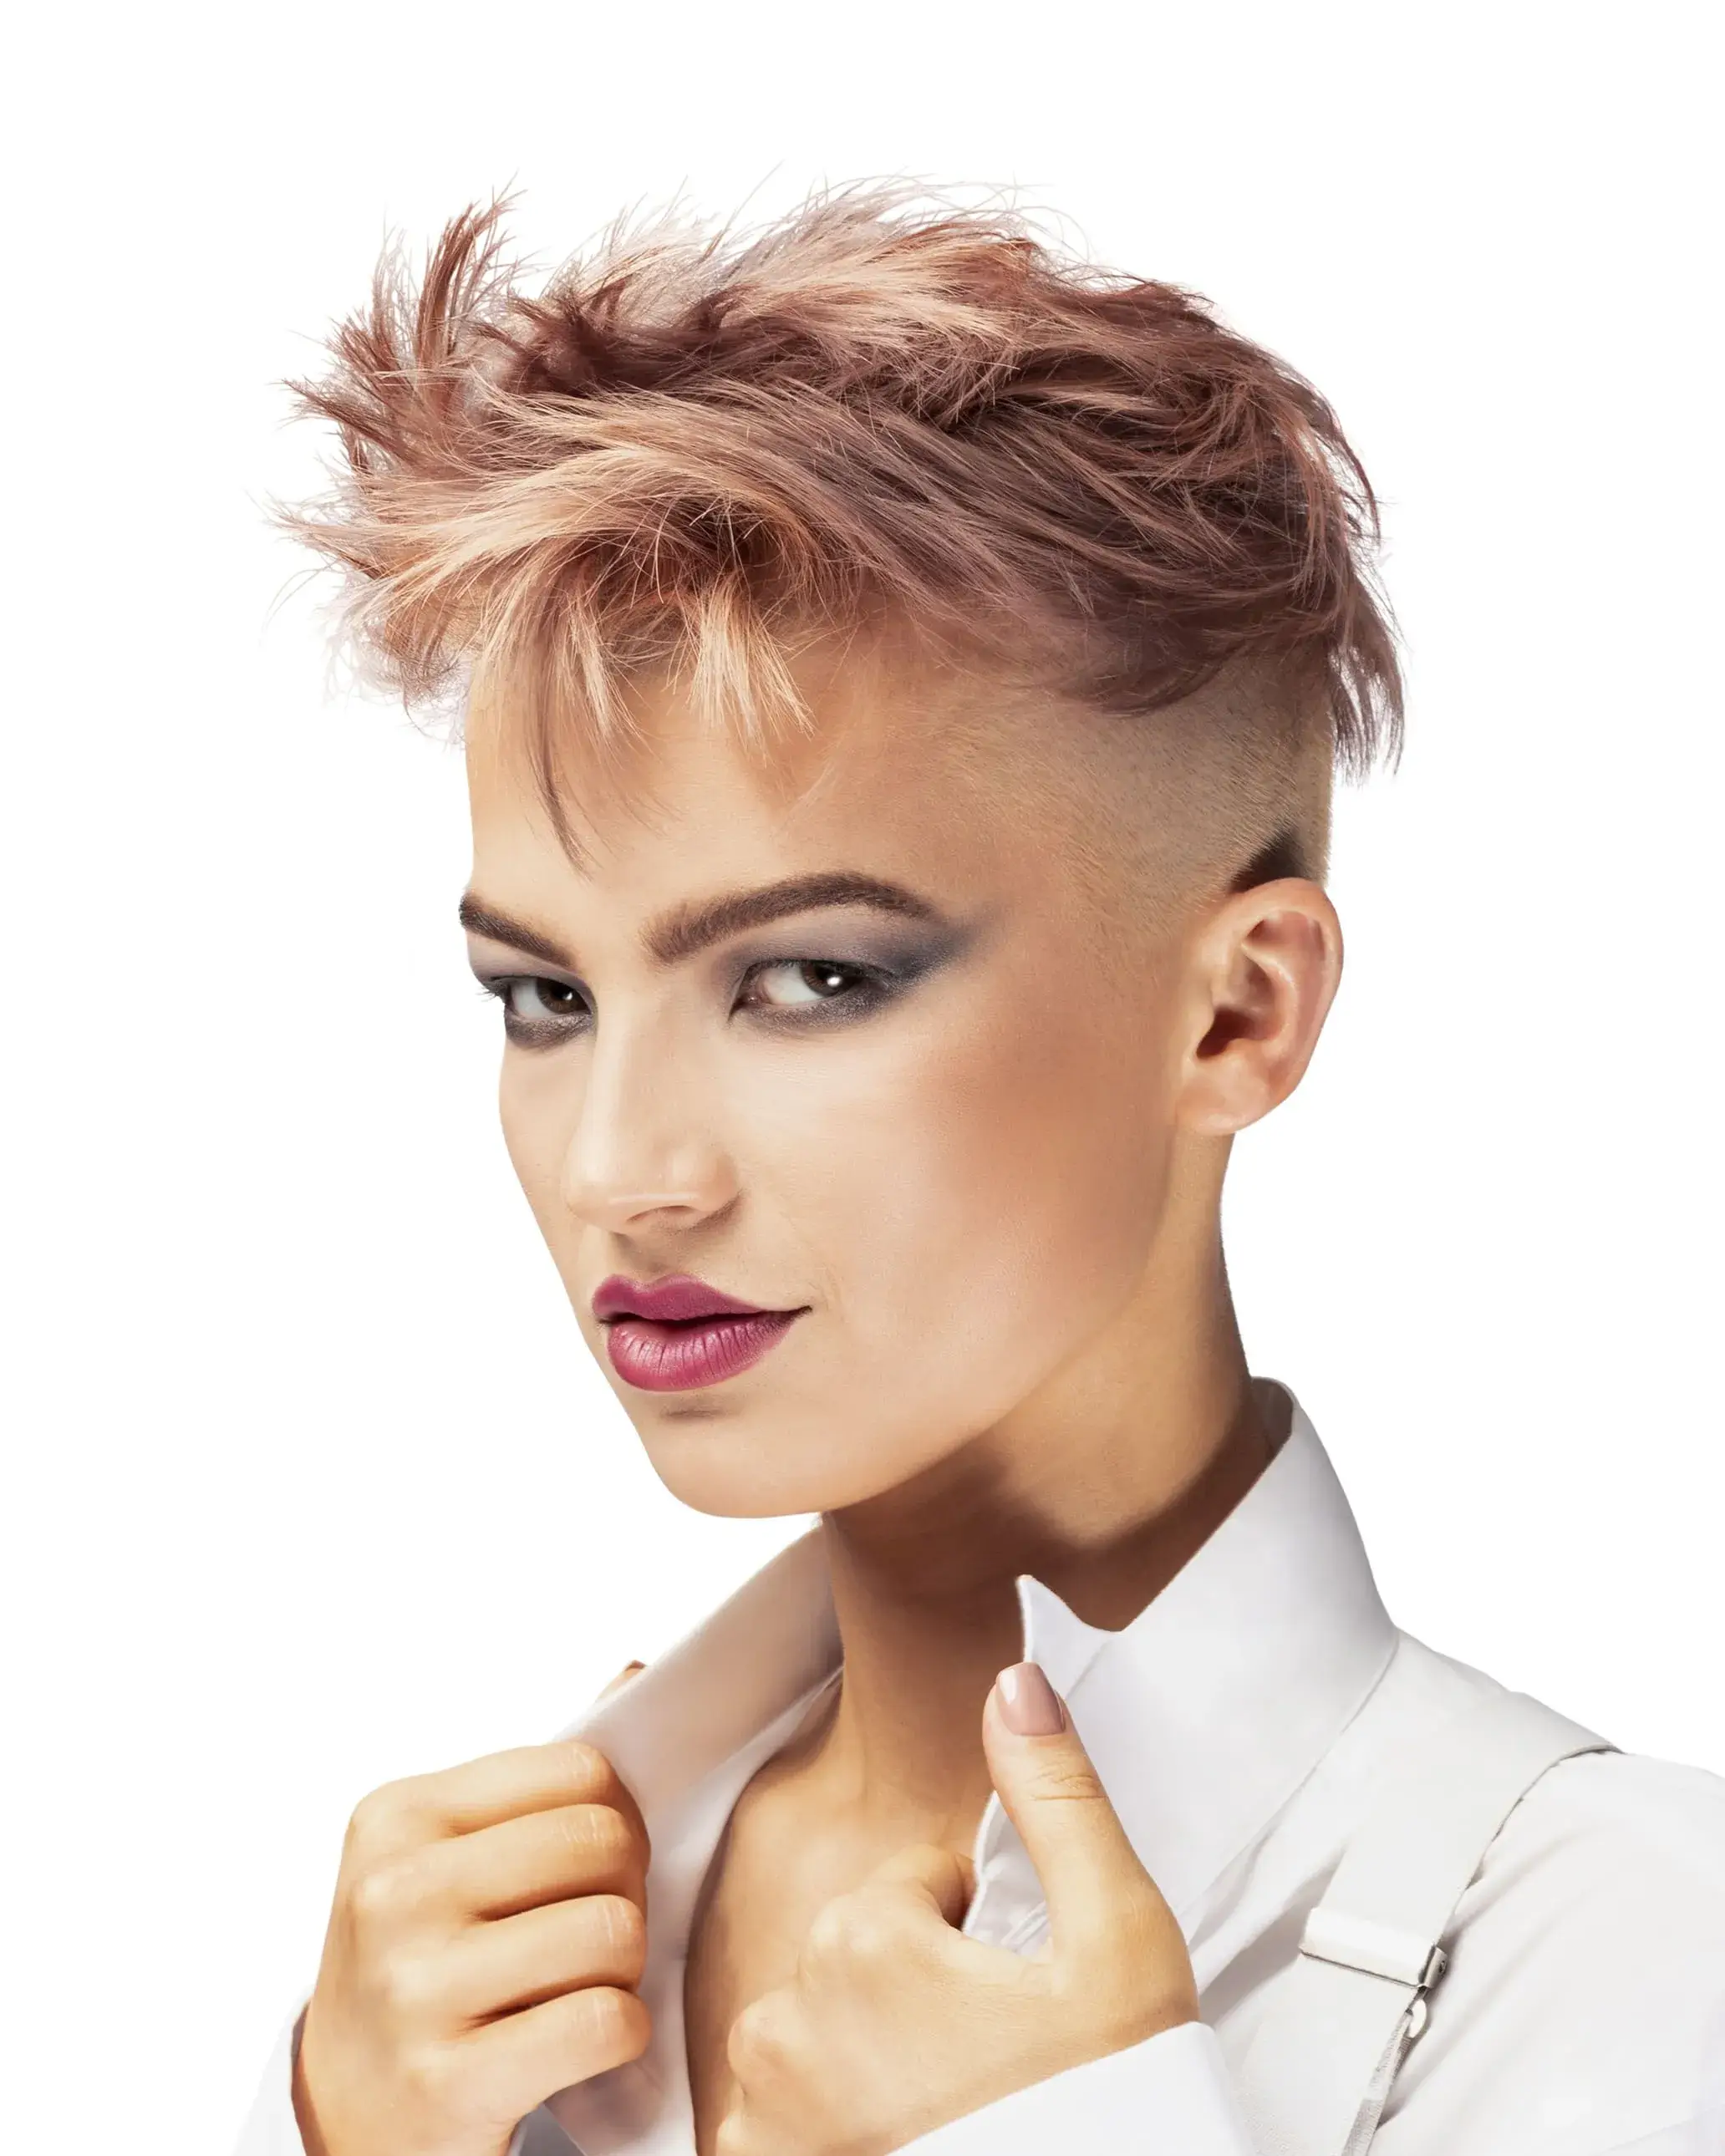 Woman with rose gold short back and sides hairstyle in white shirt